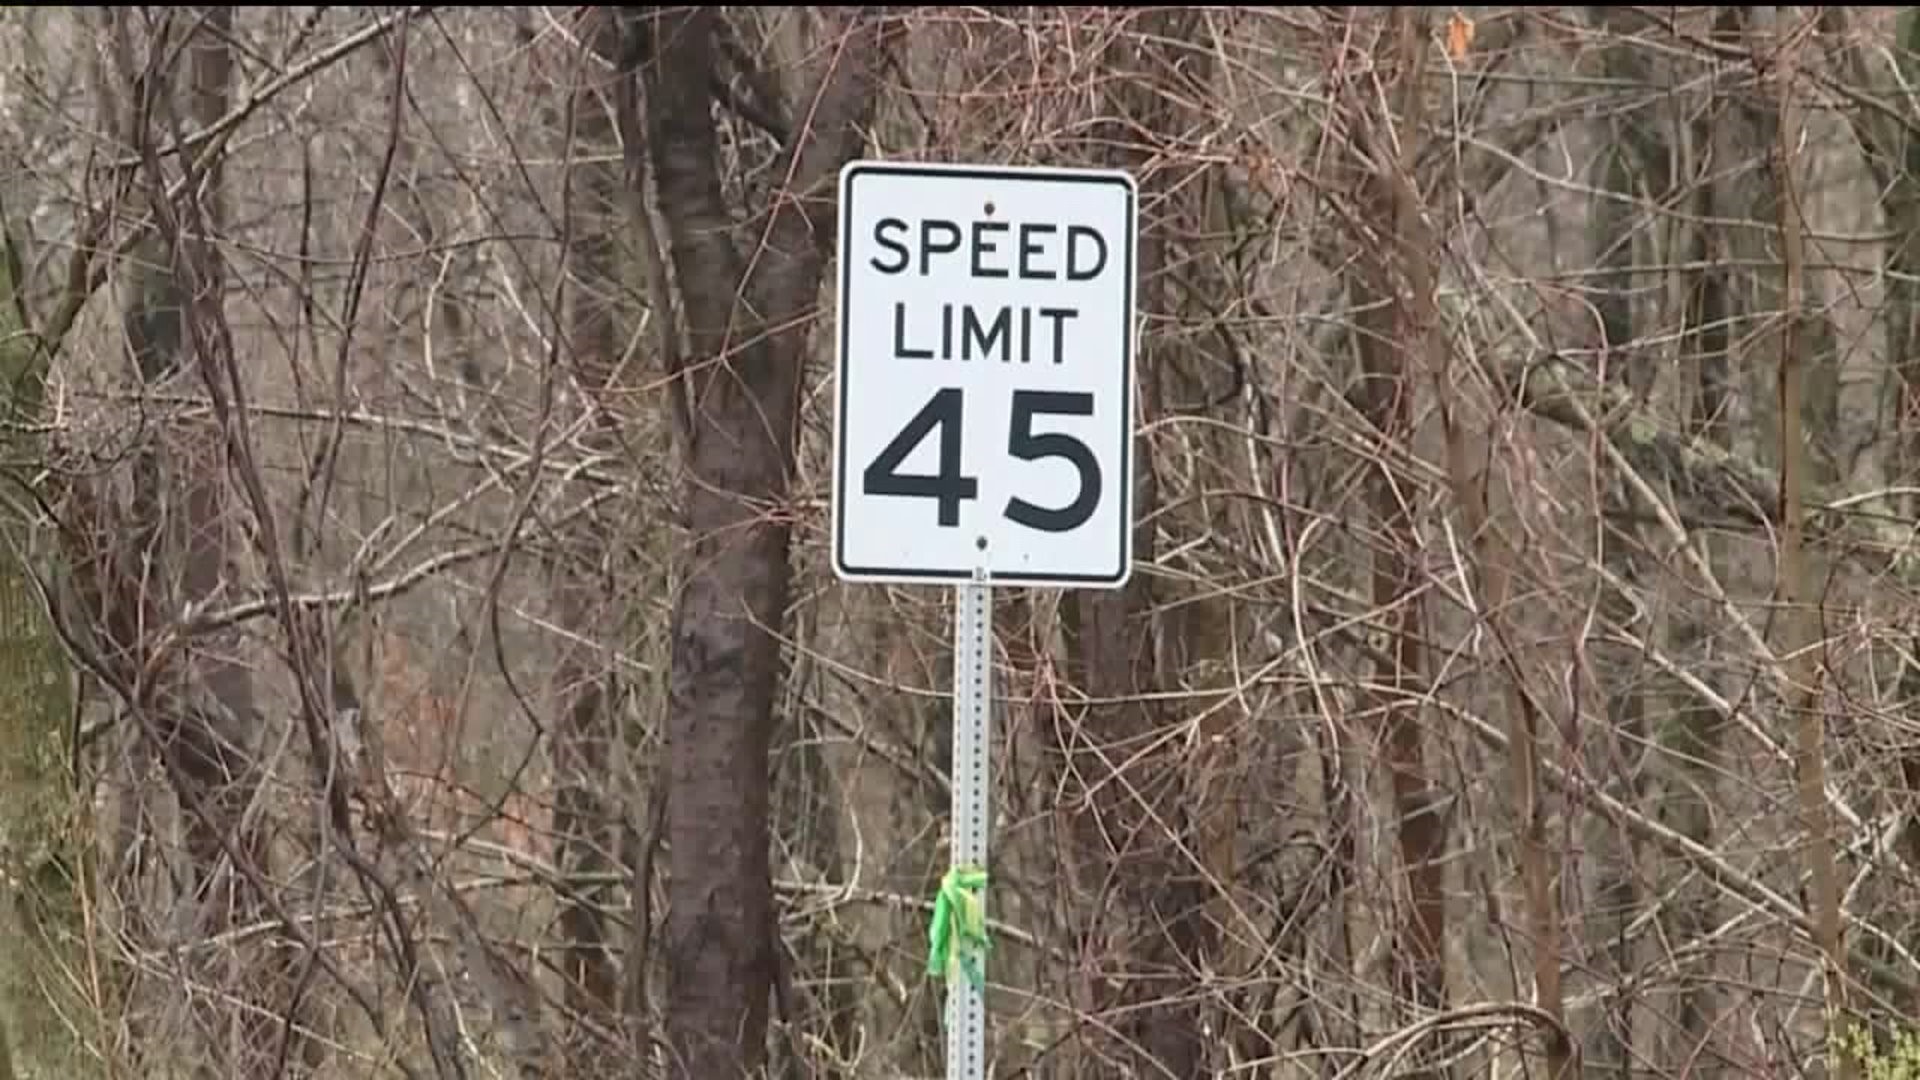 Residents Say Slow Down!